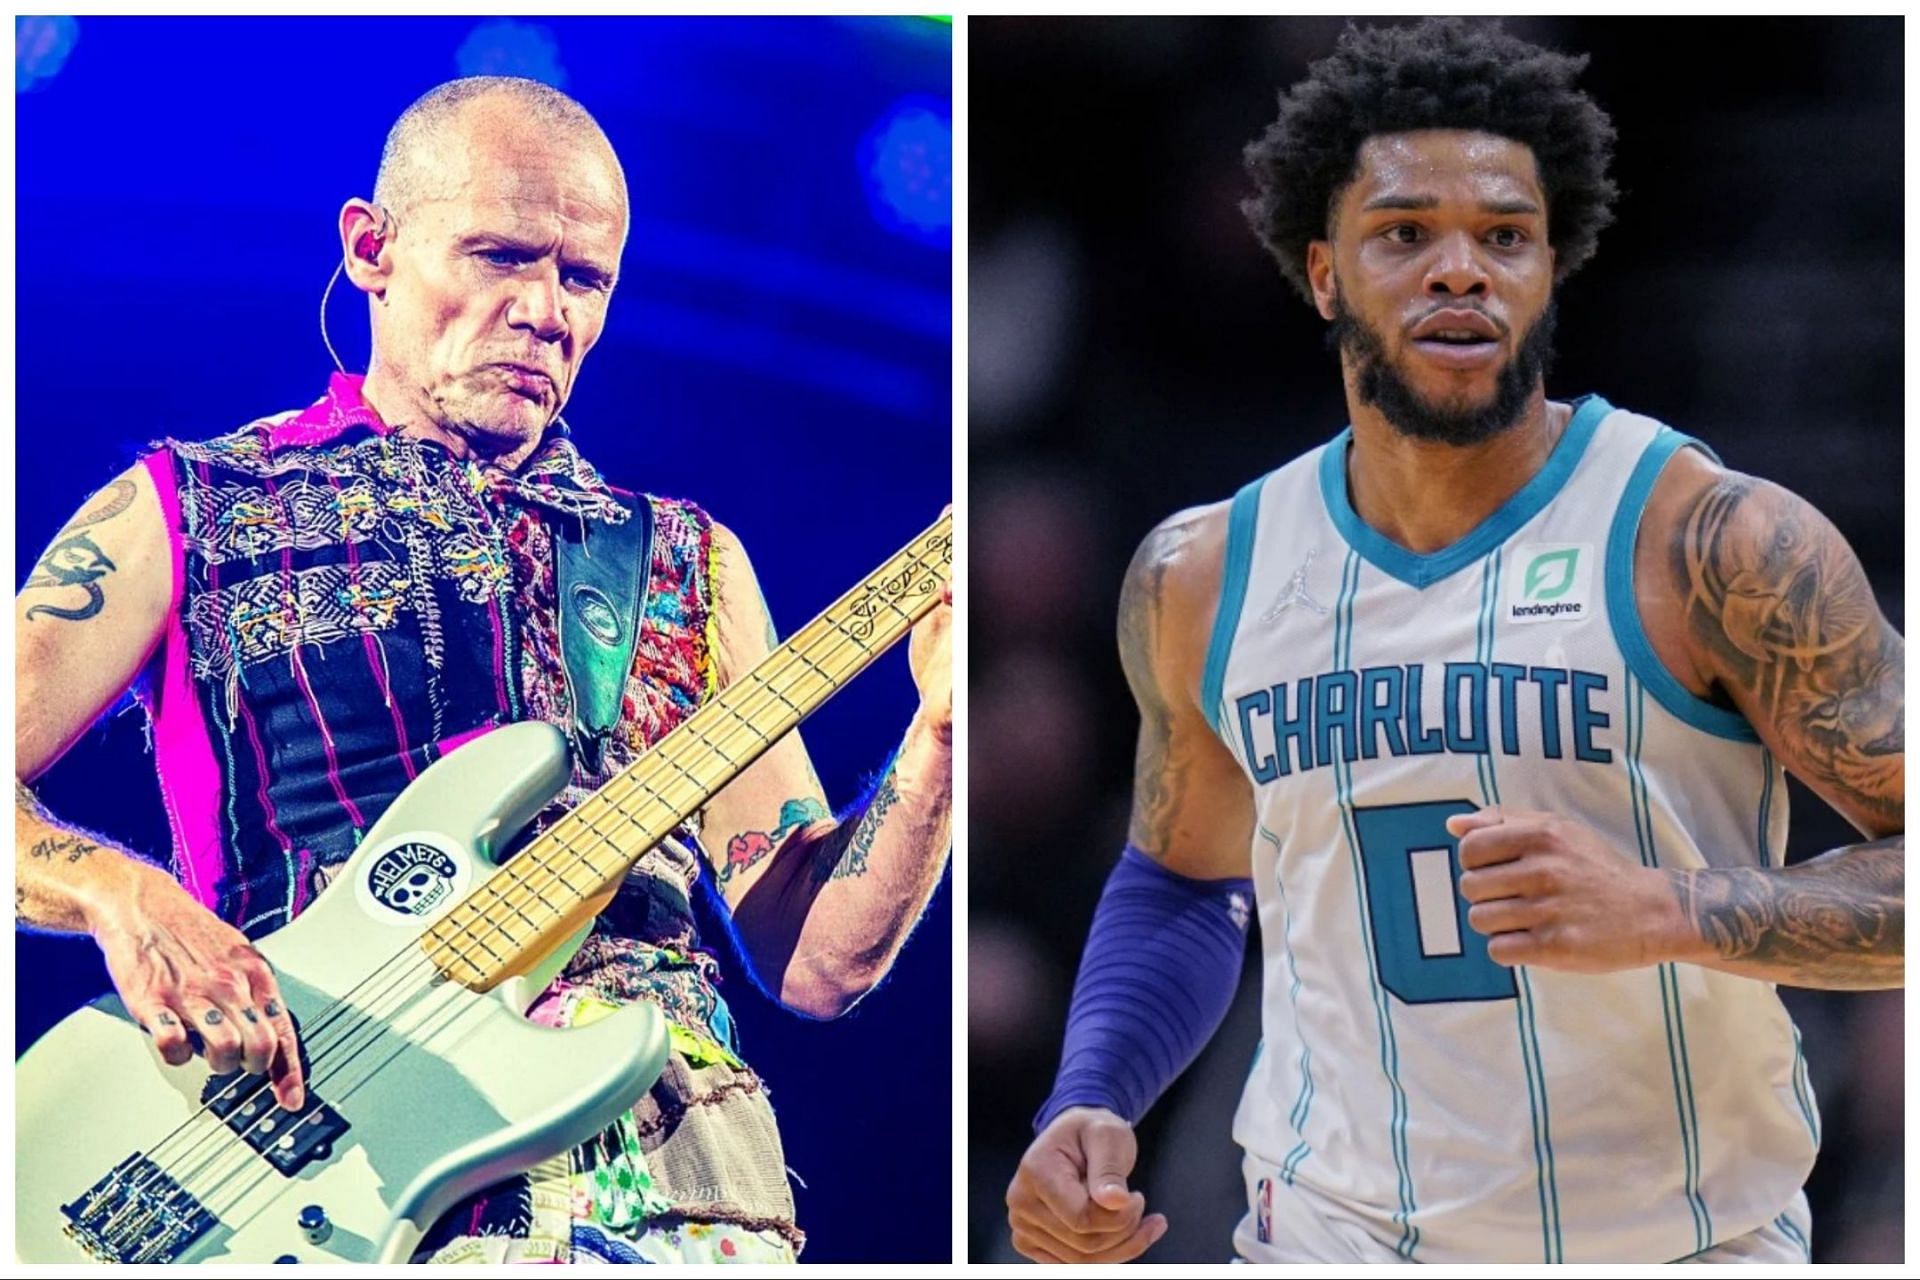 Flea of the legendary rock band Red Hot Chili Peppers (left) brings attention to Miles Bridges (right) legal troubles. Bridges is facing a 30-game suspension by the NBA